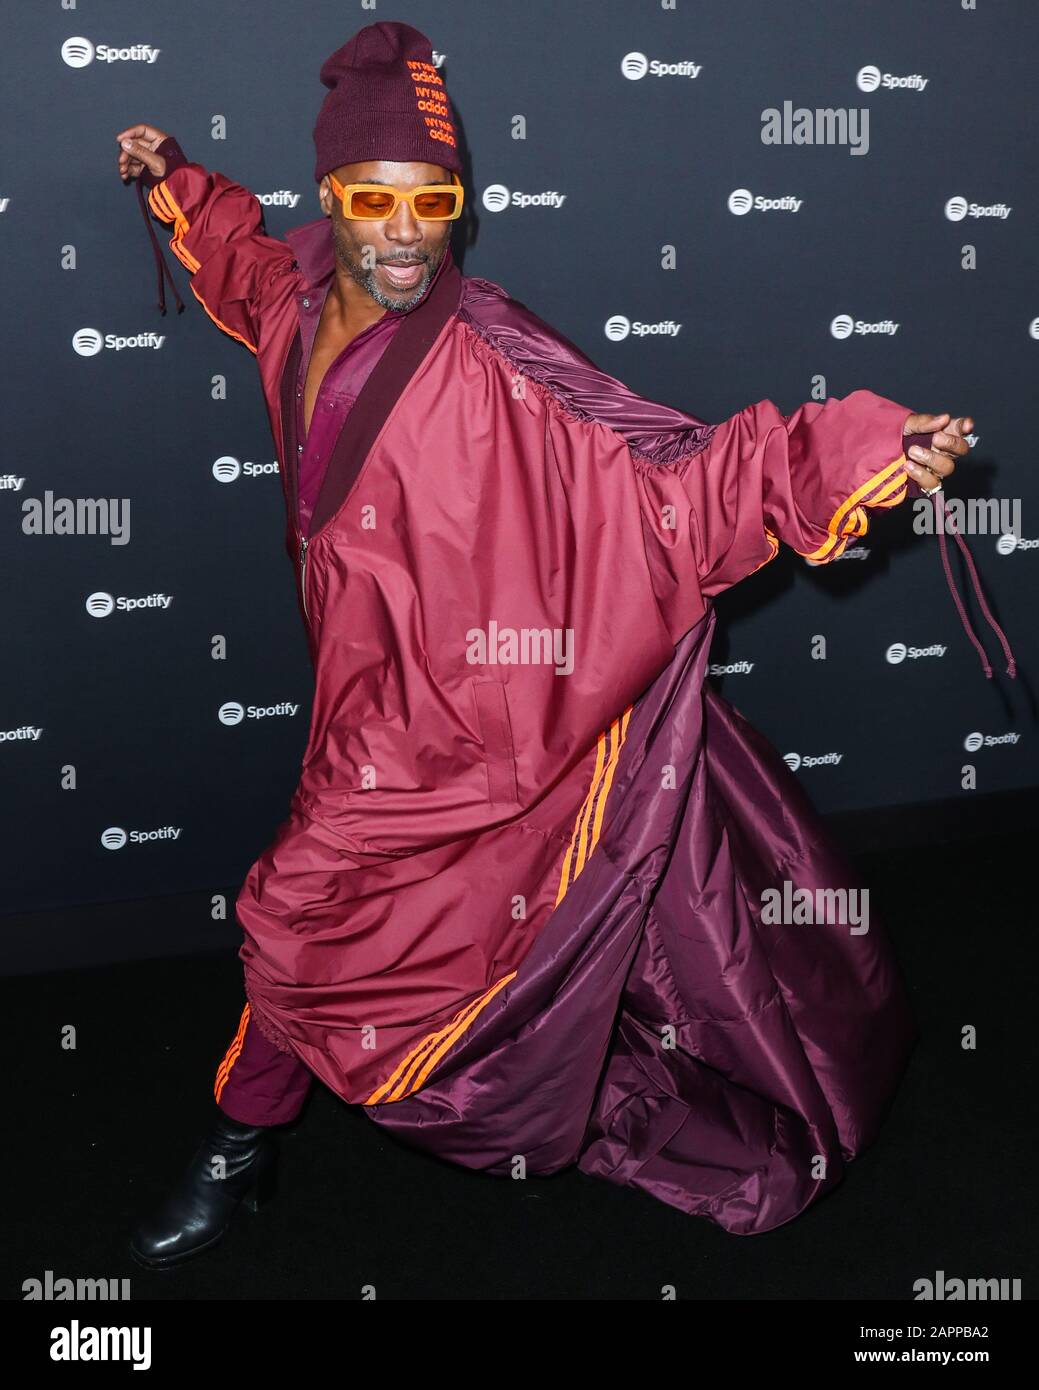 WEST HOLLYWOOD, LOS ANGELES, CALIFORNIA, USA - JANUARY 23: Billy Porter  wearing Adidas x Ivy Park arrives at the Spotify Best New Artist 2020 Party  held at The Lot Studios on January